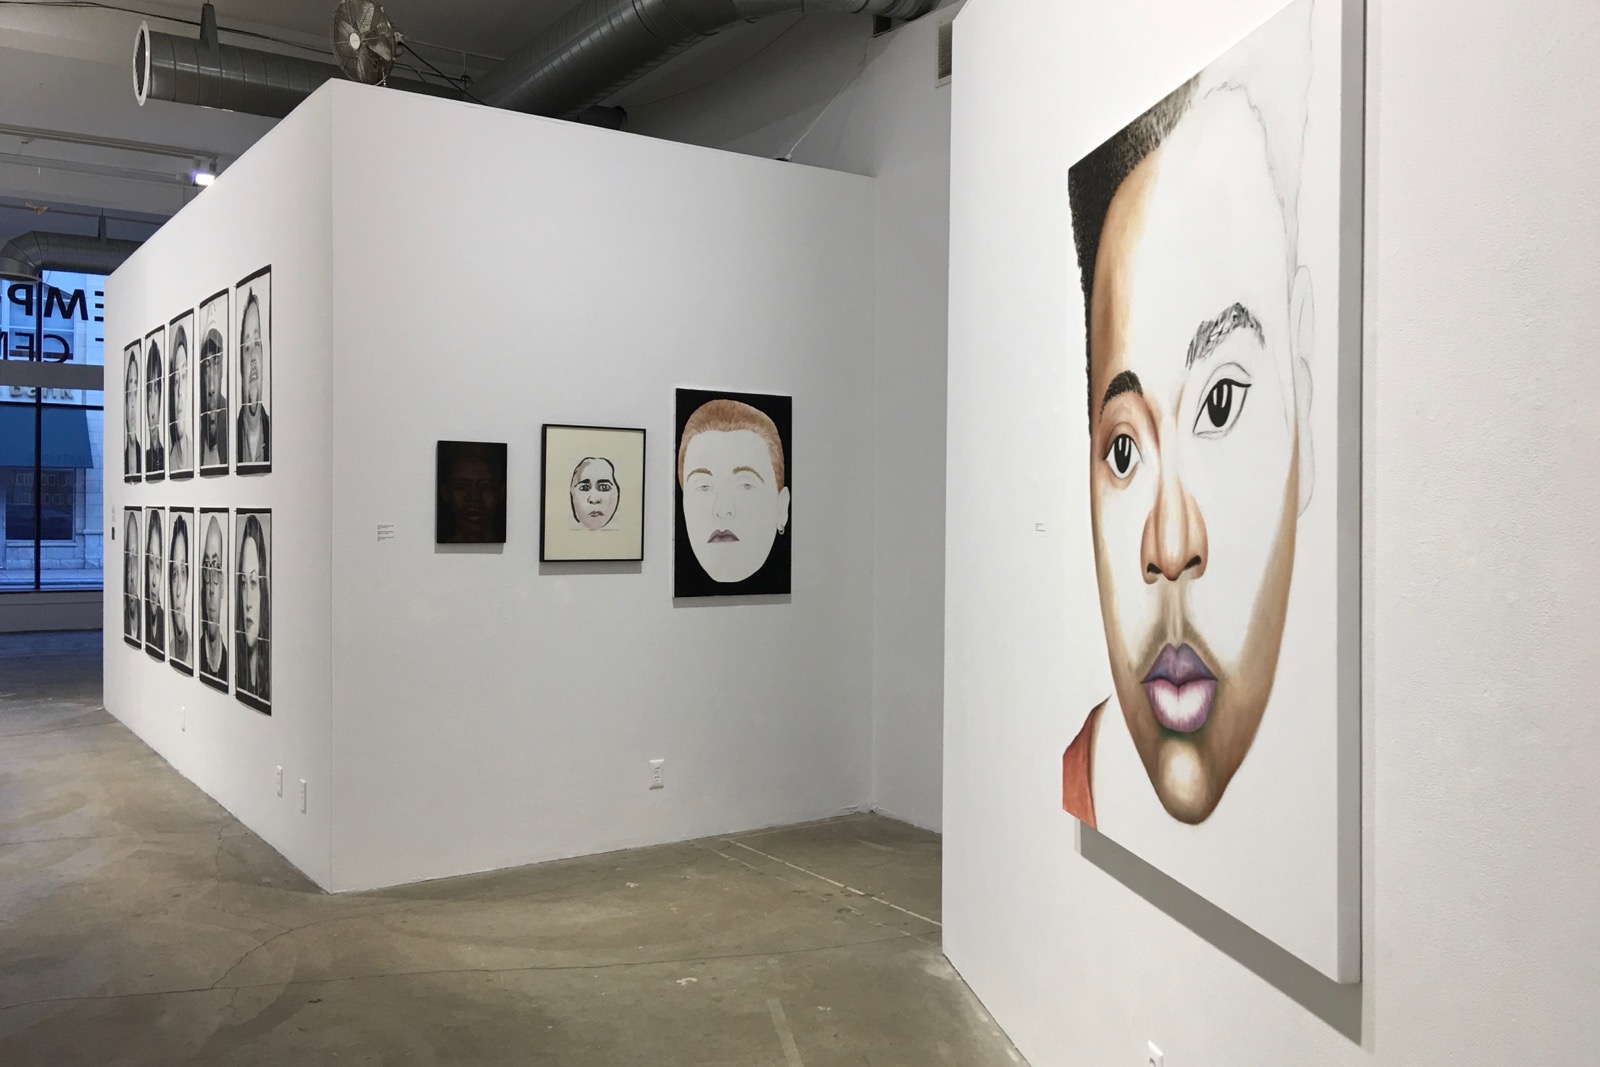 Installation view of "Witness - Paul Dodd, Leo Dodd" at Rochester Contemporary 2017